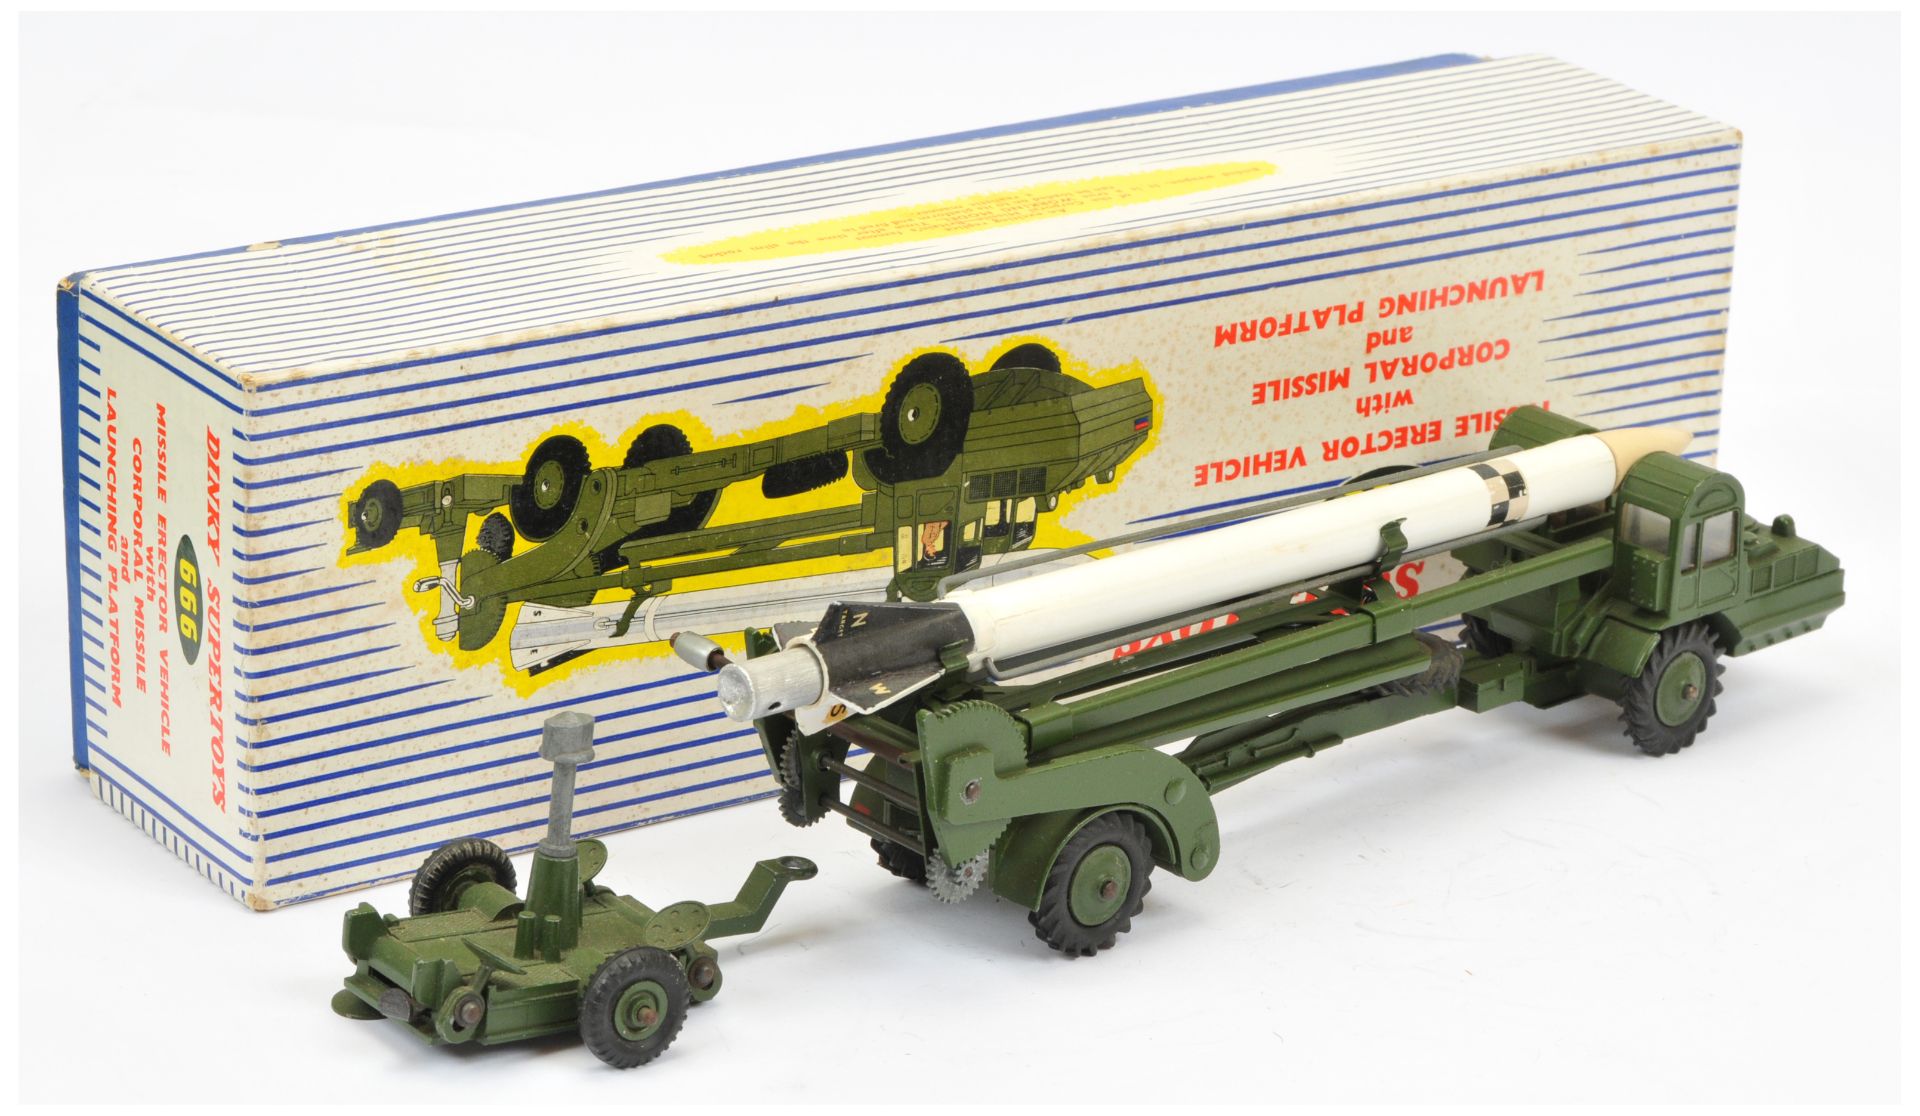 Dinky 666 Missile Erector Vehicle with Corporal Missile and Launching Platform - Image 2 of 2